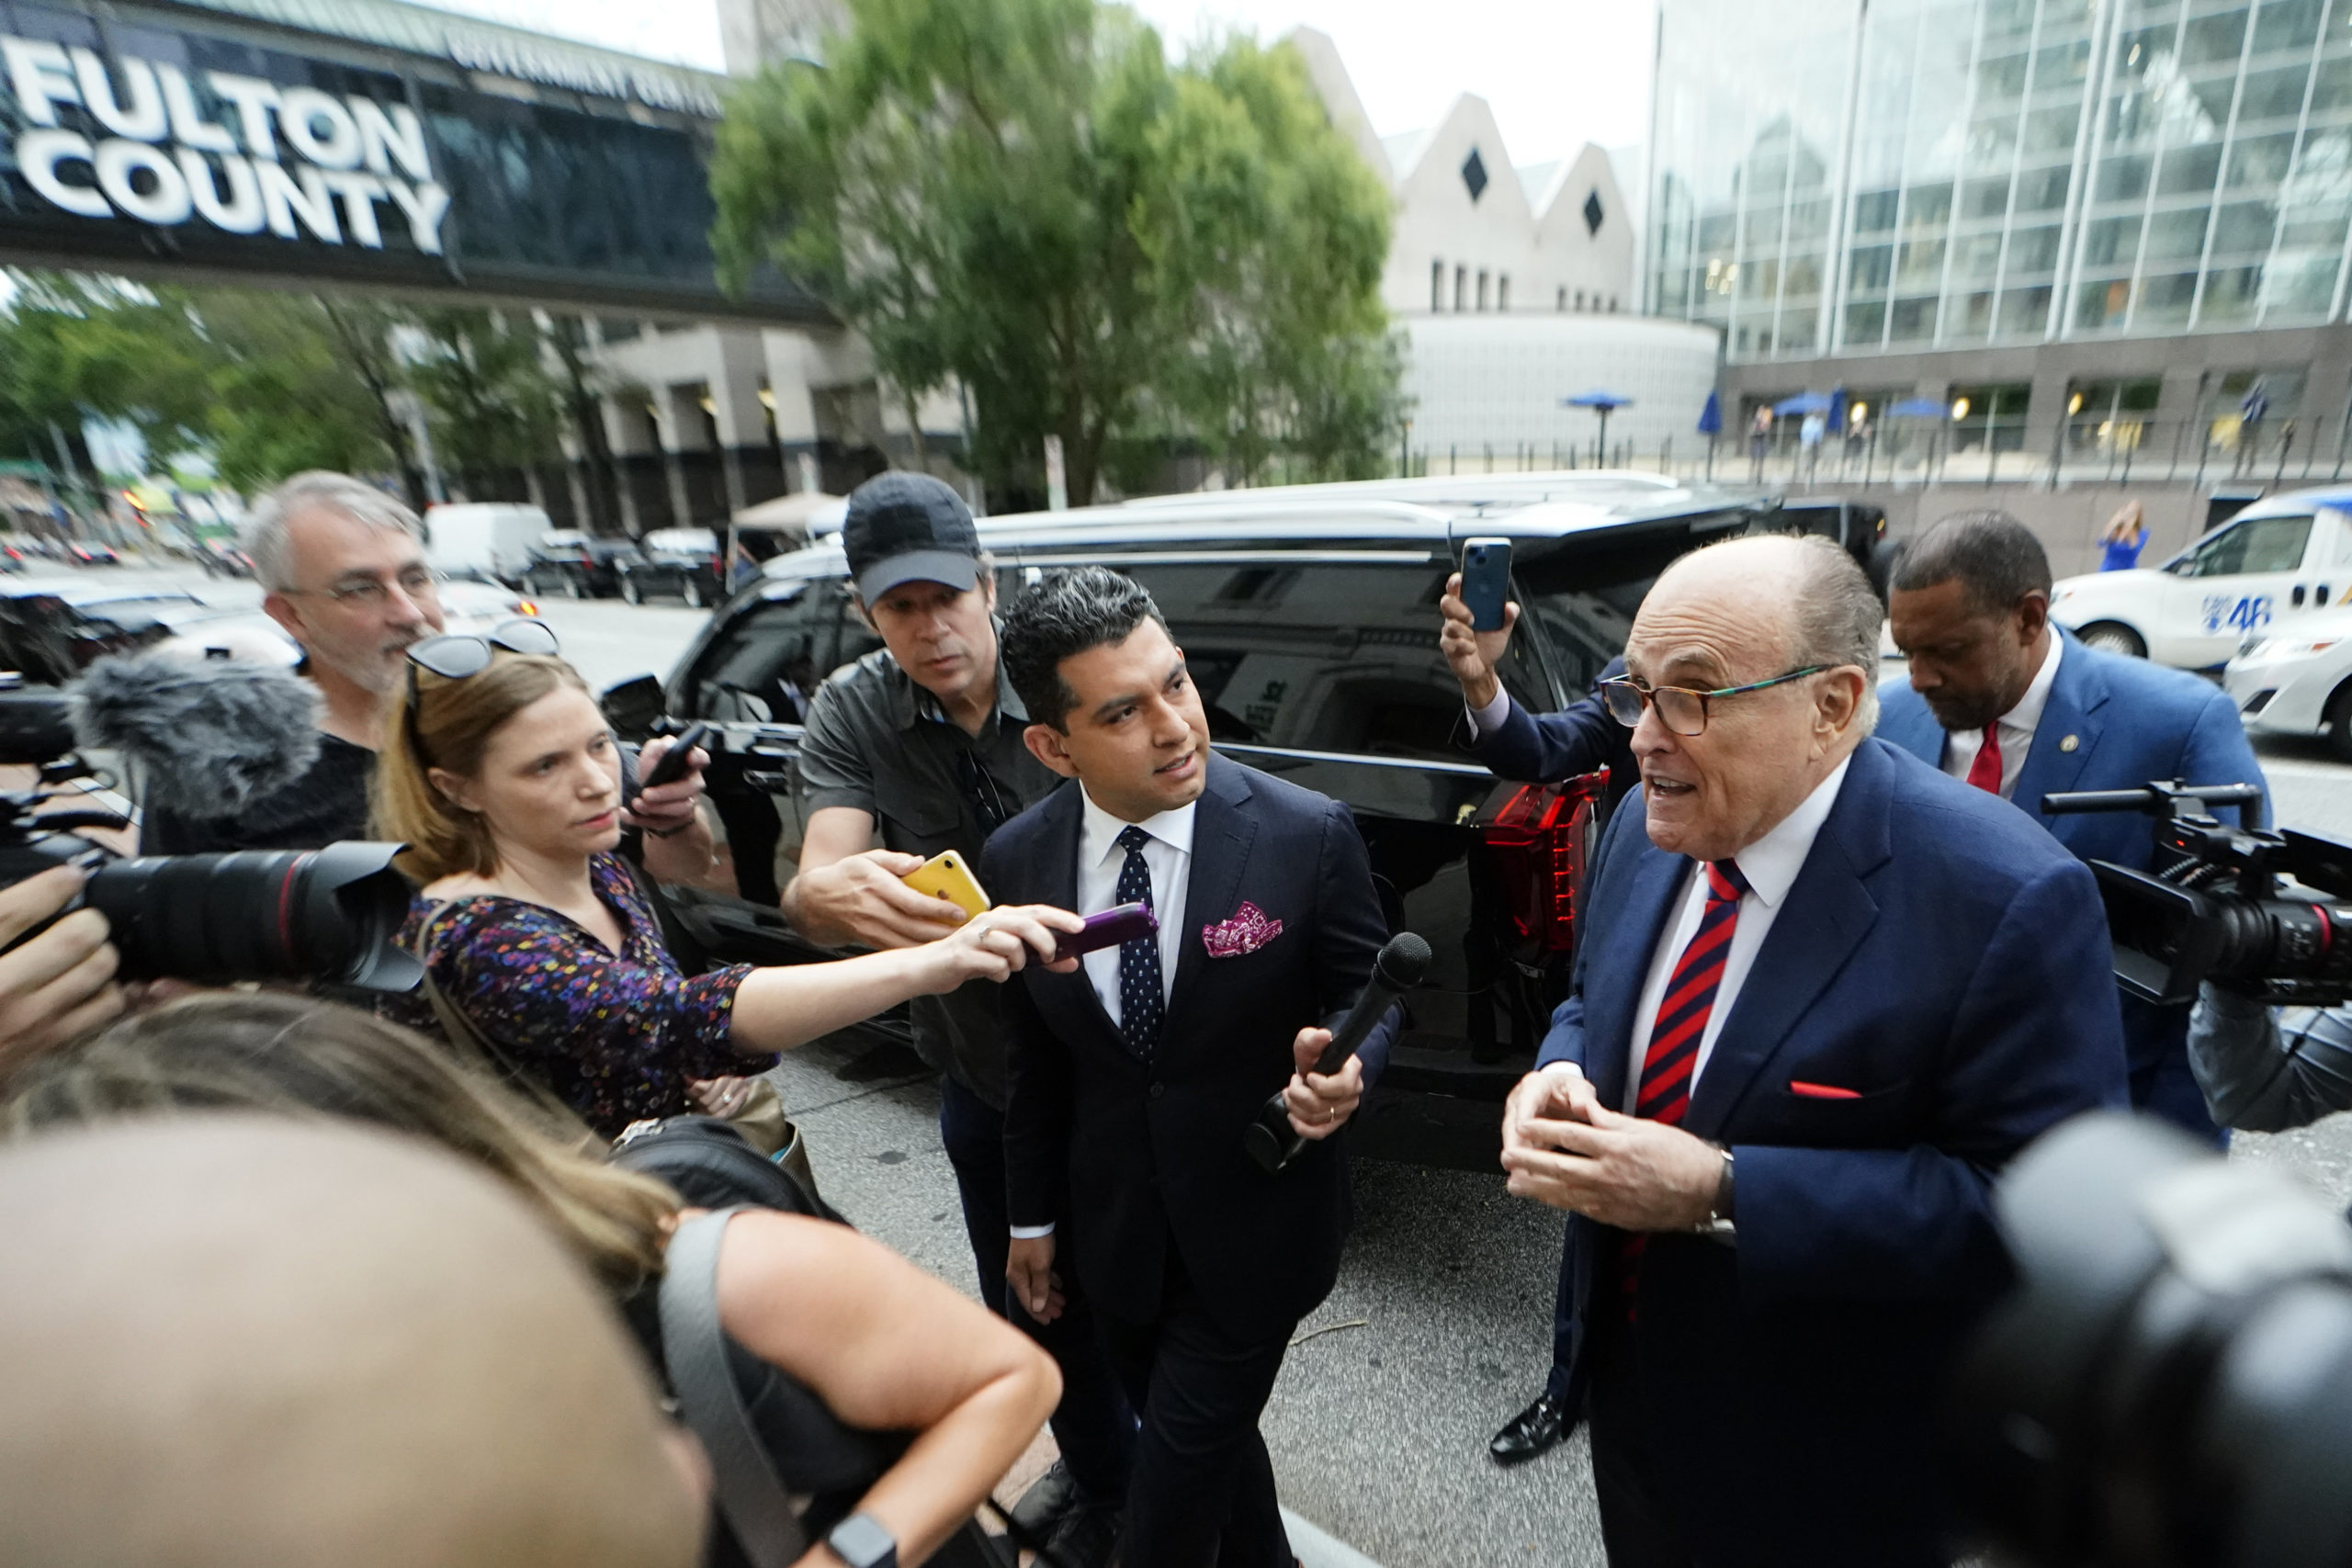 Rudy Giuliani is seen arriving at the Atlanta's Fulton County Courthouse in a file photo from Aug. 17, 2022, in Atlanta. A special grand jury investigating whether then-President Donald Trump and his allies illegally tried to overturn his defeat in the 2020 election in Georgia appears to be wrapping up its work.